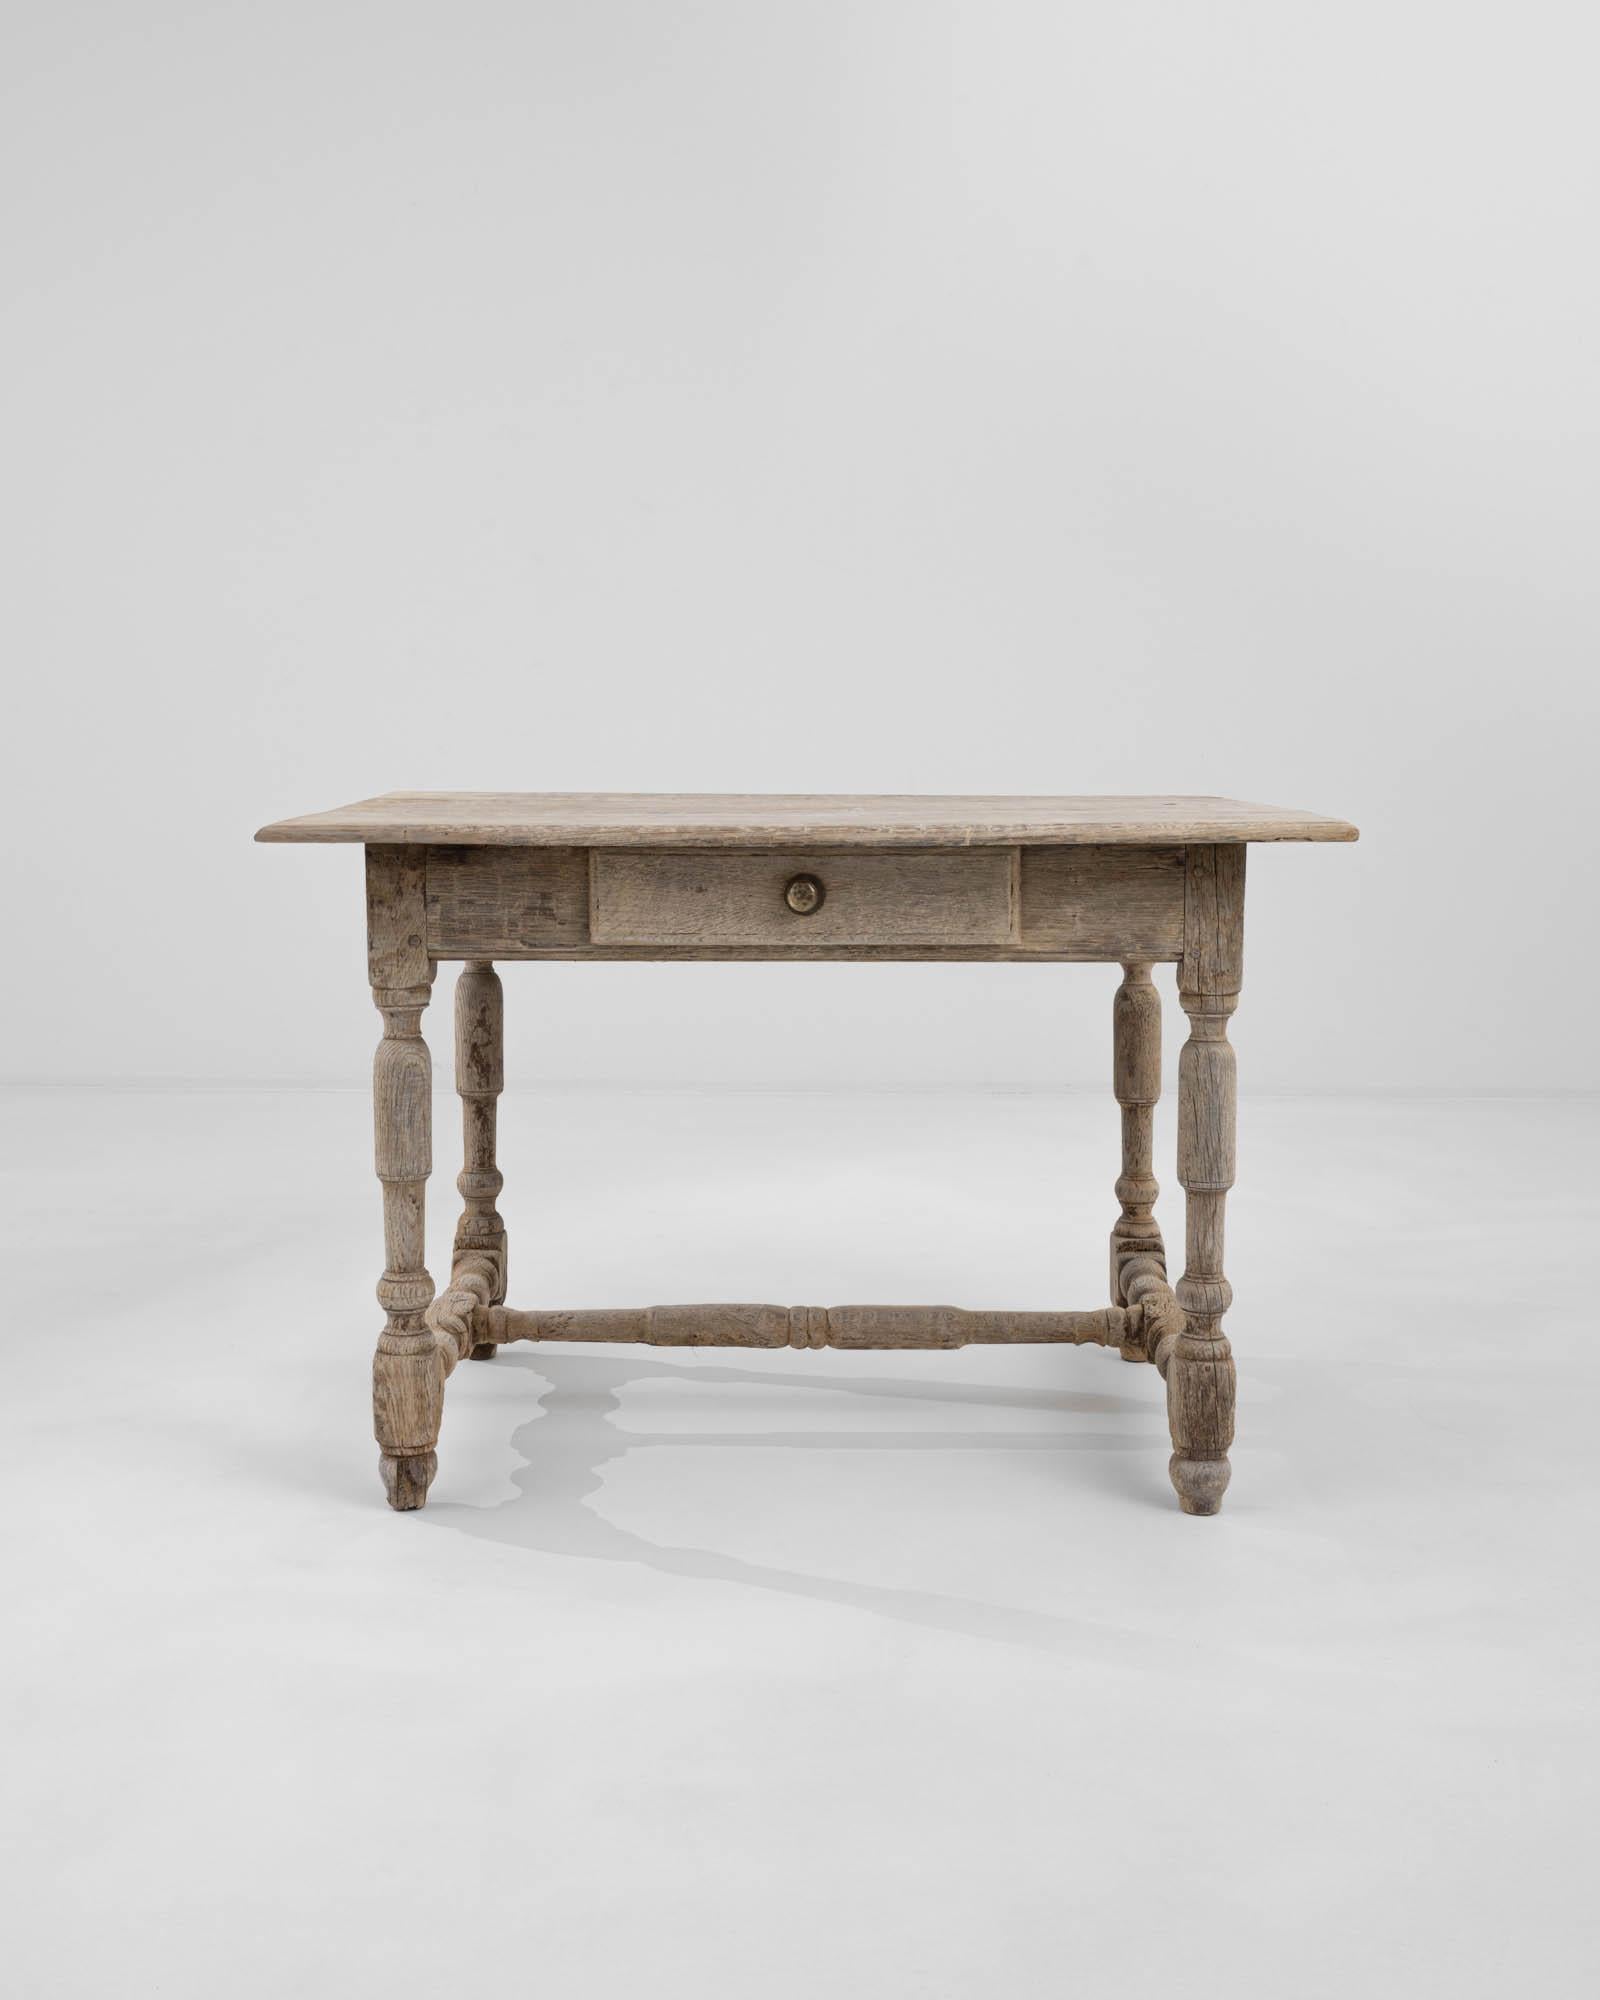 Transport yourself to the refined elegance of 19th century France with this exquisite wooden side table. Crafted with an artful and engaging design, this small yet captivating piece quietly commands attention, making a grand aesthetic statement in